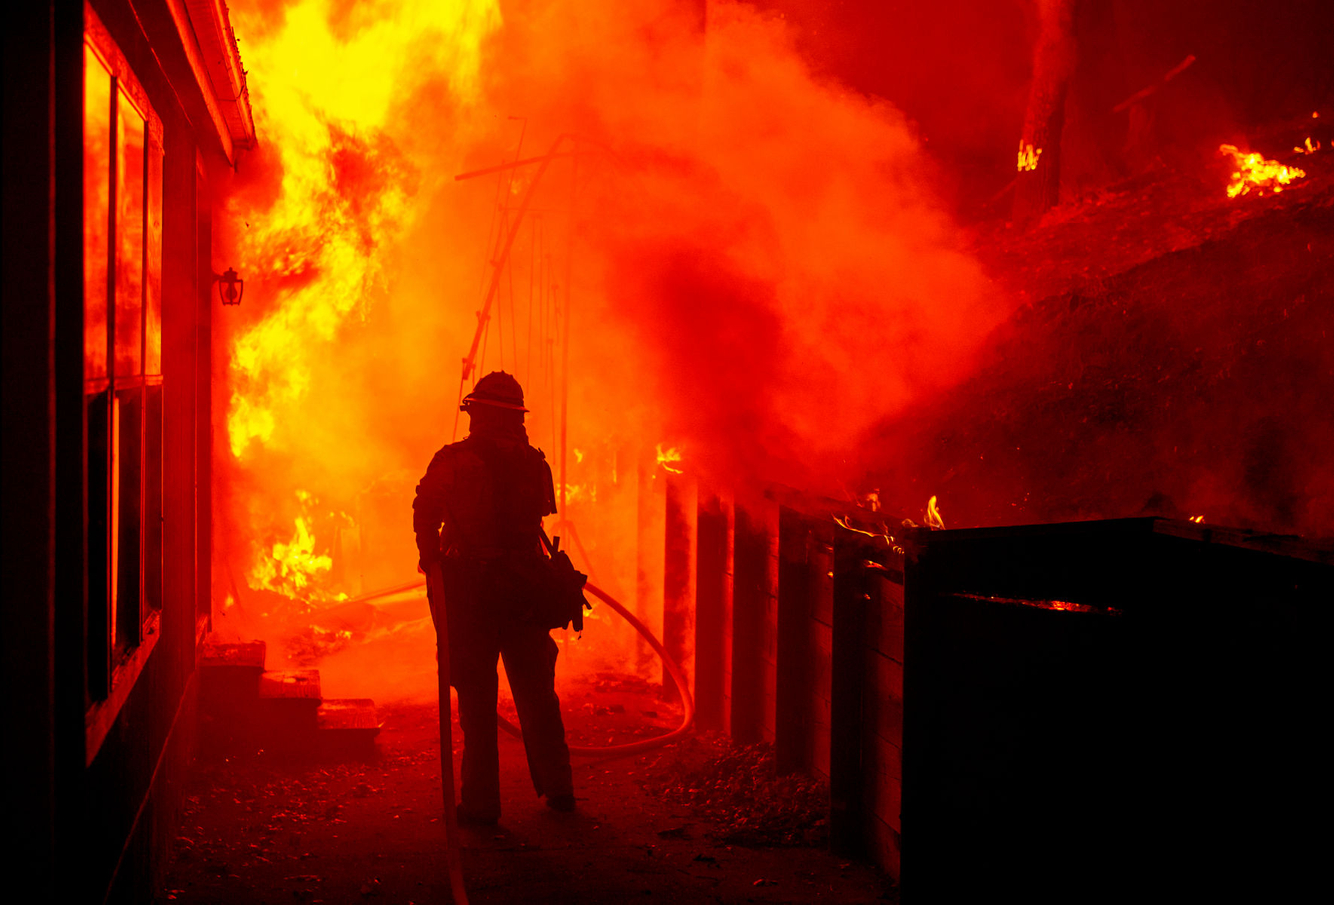 A firefighter attempts to save a burning home during the Valley fire.